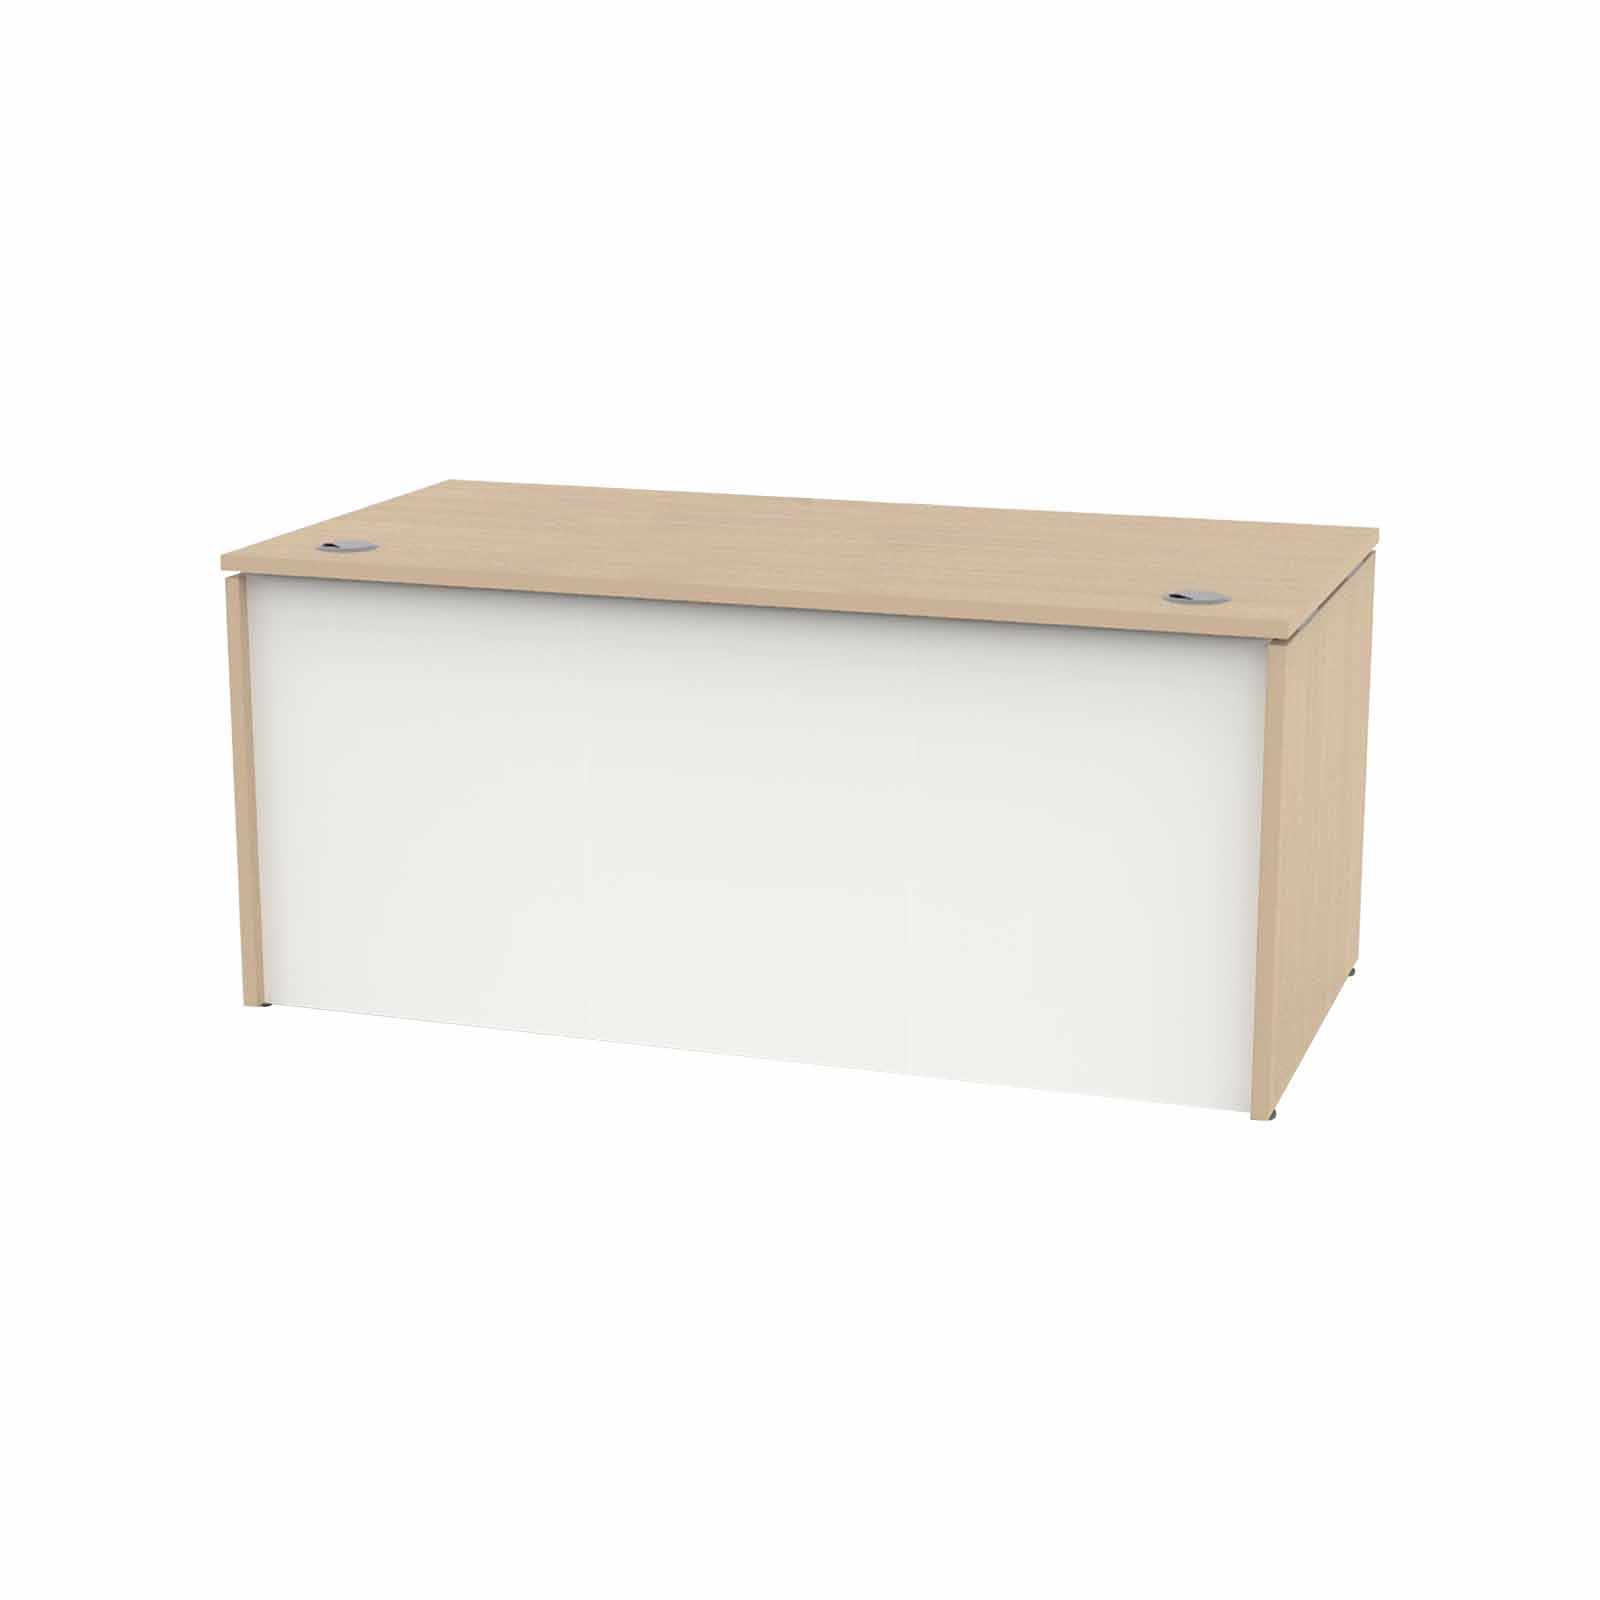 MADE TO ORDER Greeting Panel End Desk